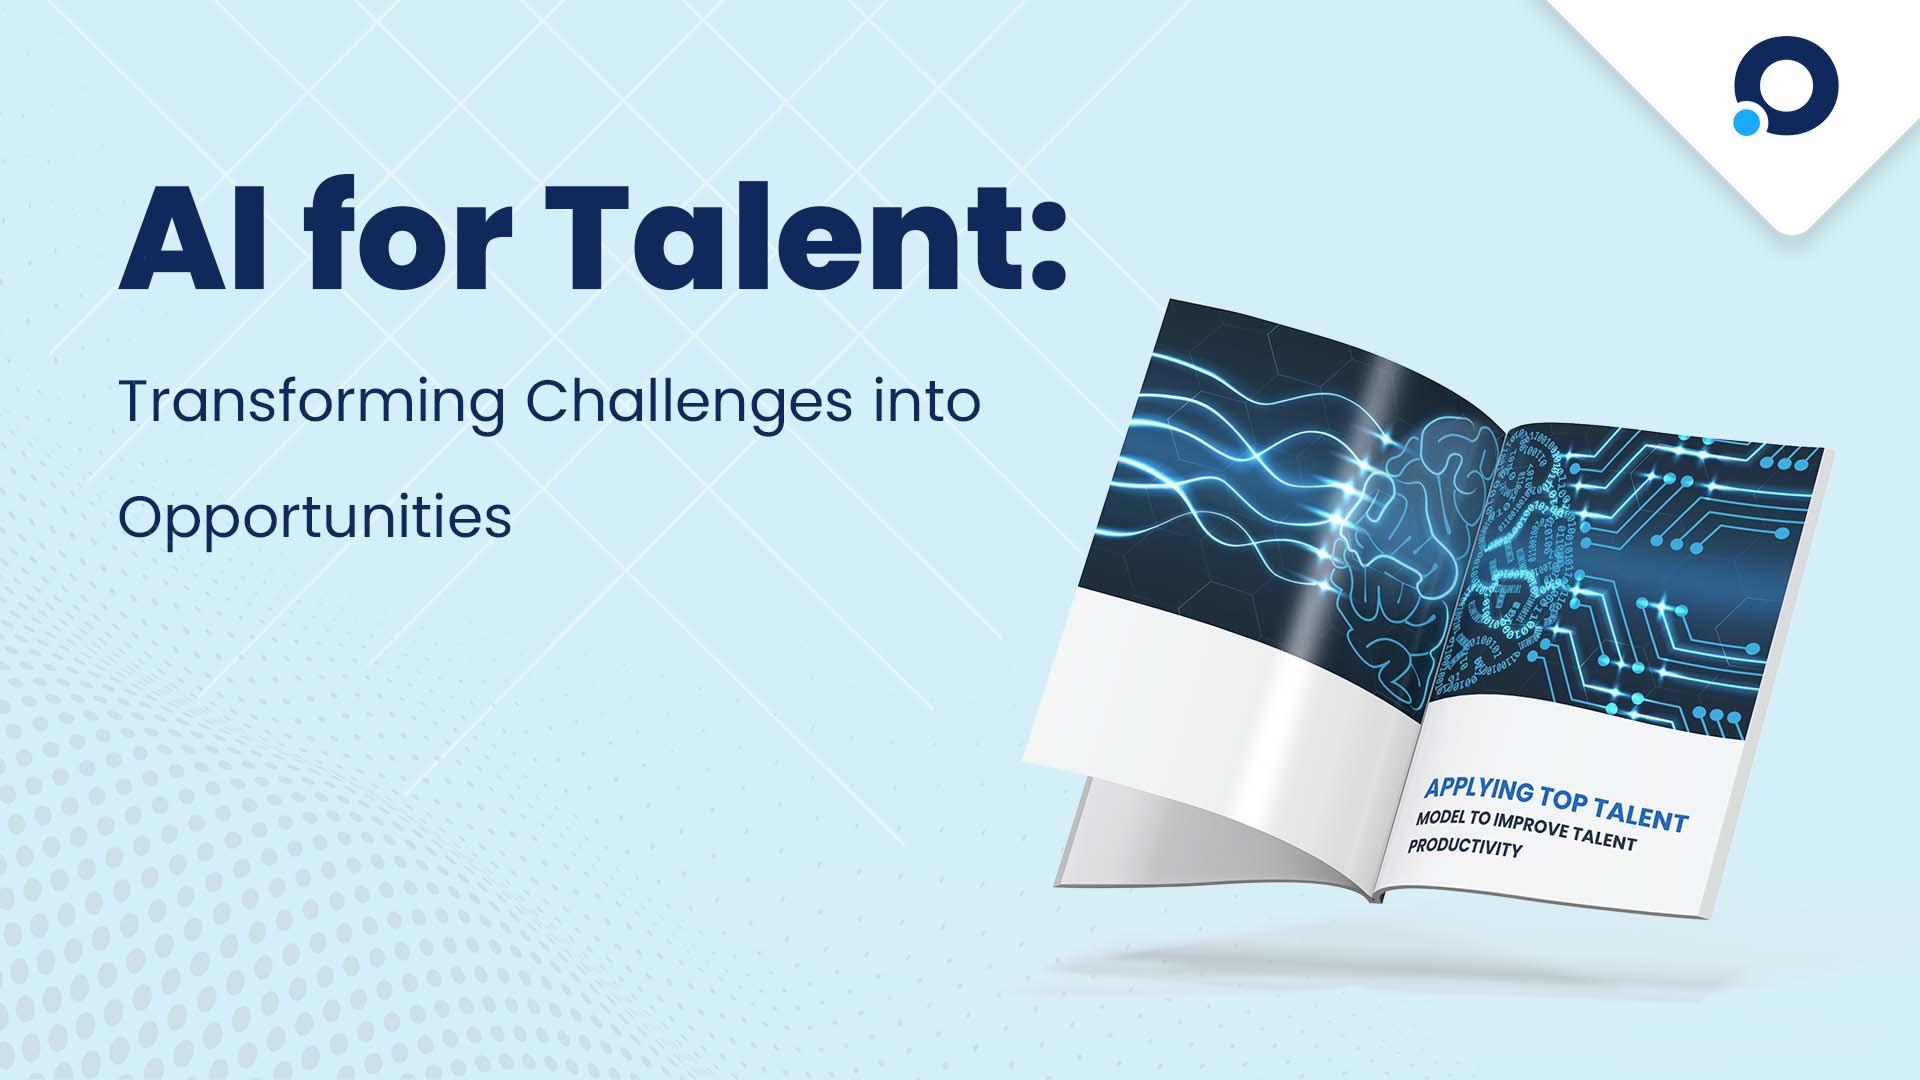 AI for Talent: Transforming Challenges into Opportunities